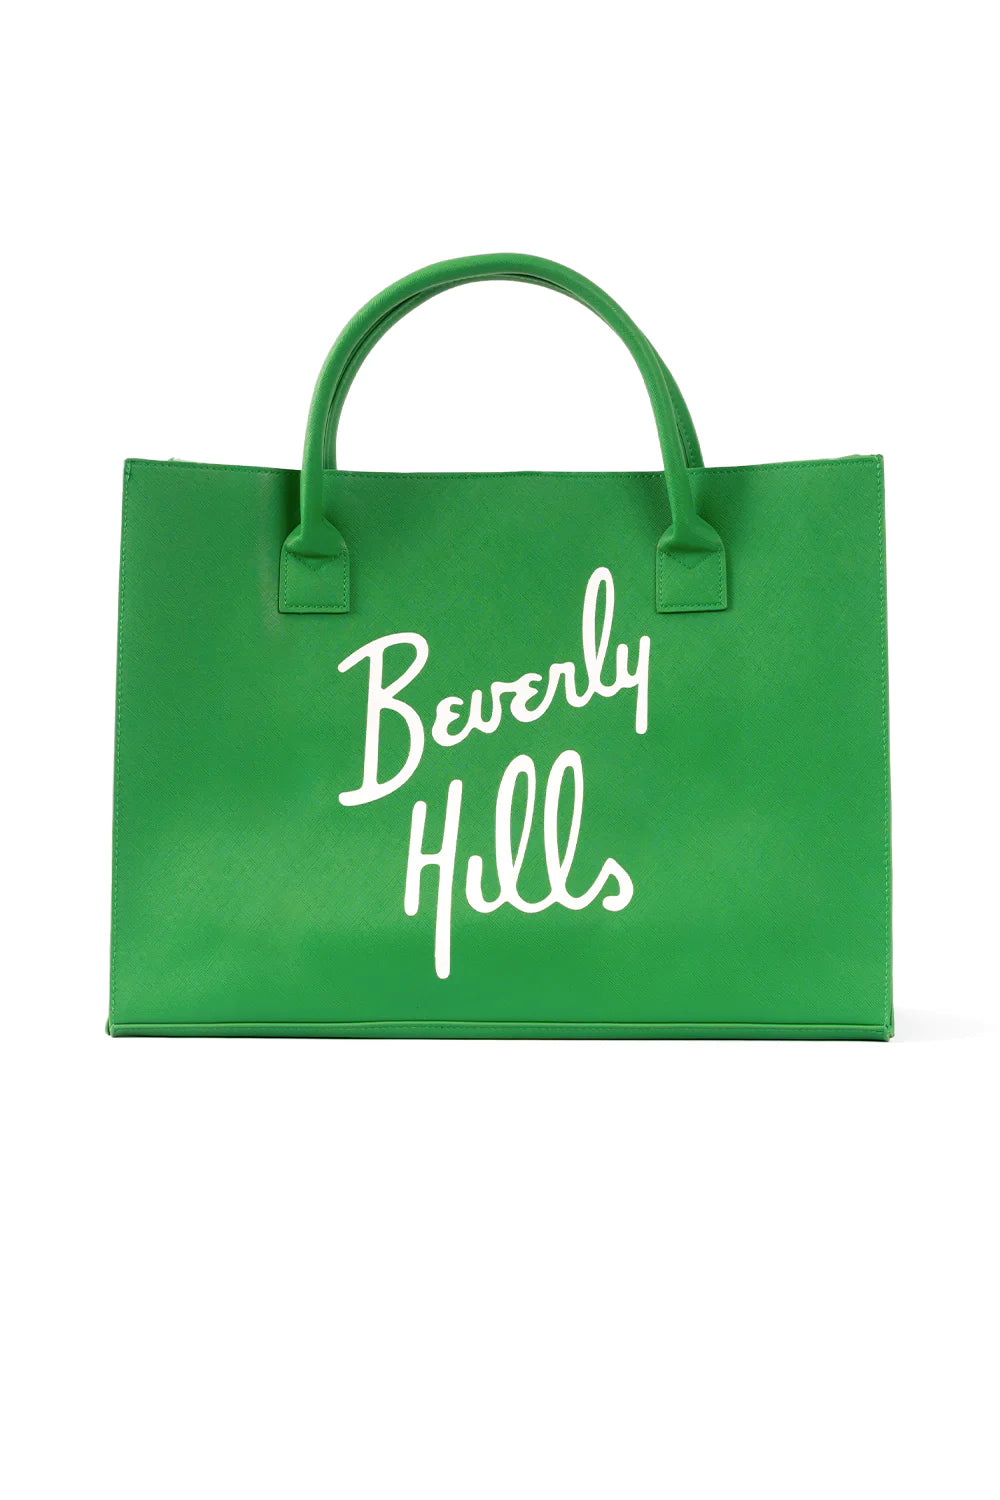 Beverly Hills Tote Bag (Green/White)